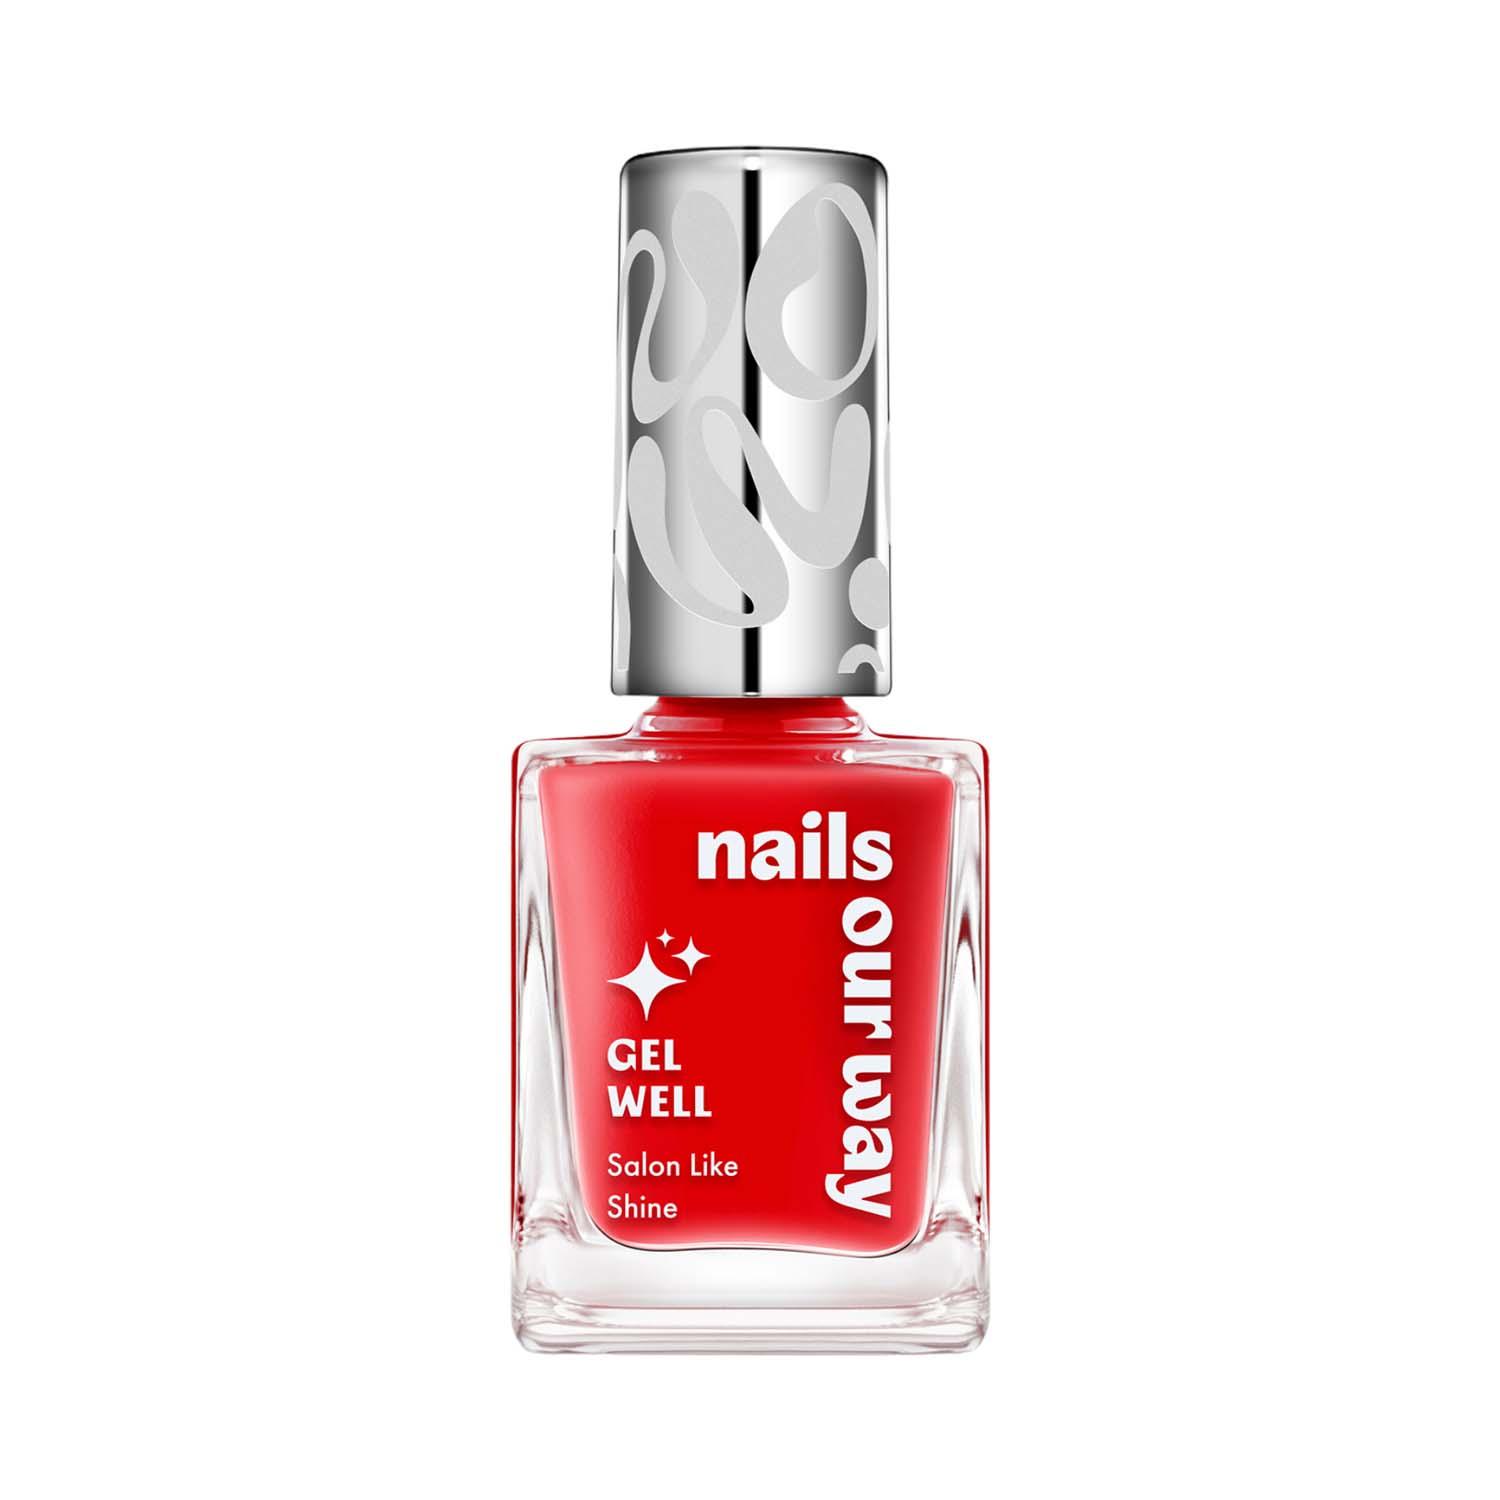 Nails Our Way | Nails Our Way Gel Well Nail Enamel - 102 Cheery (10 ml)